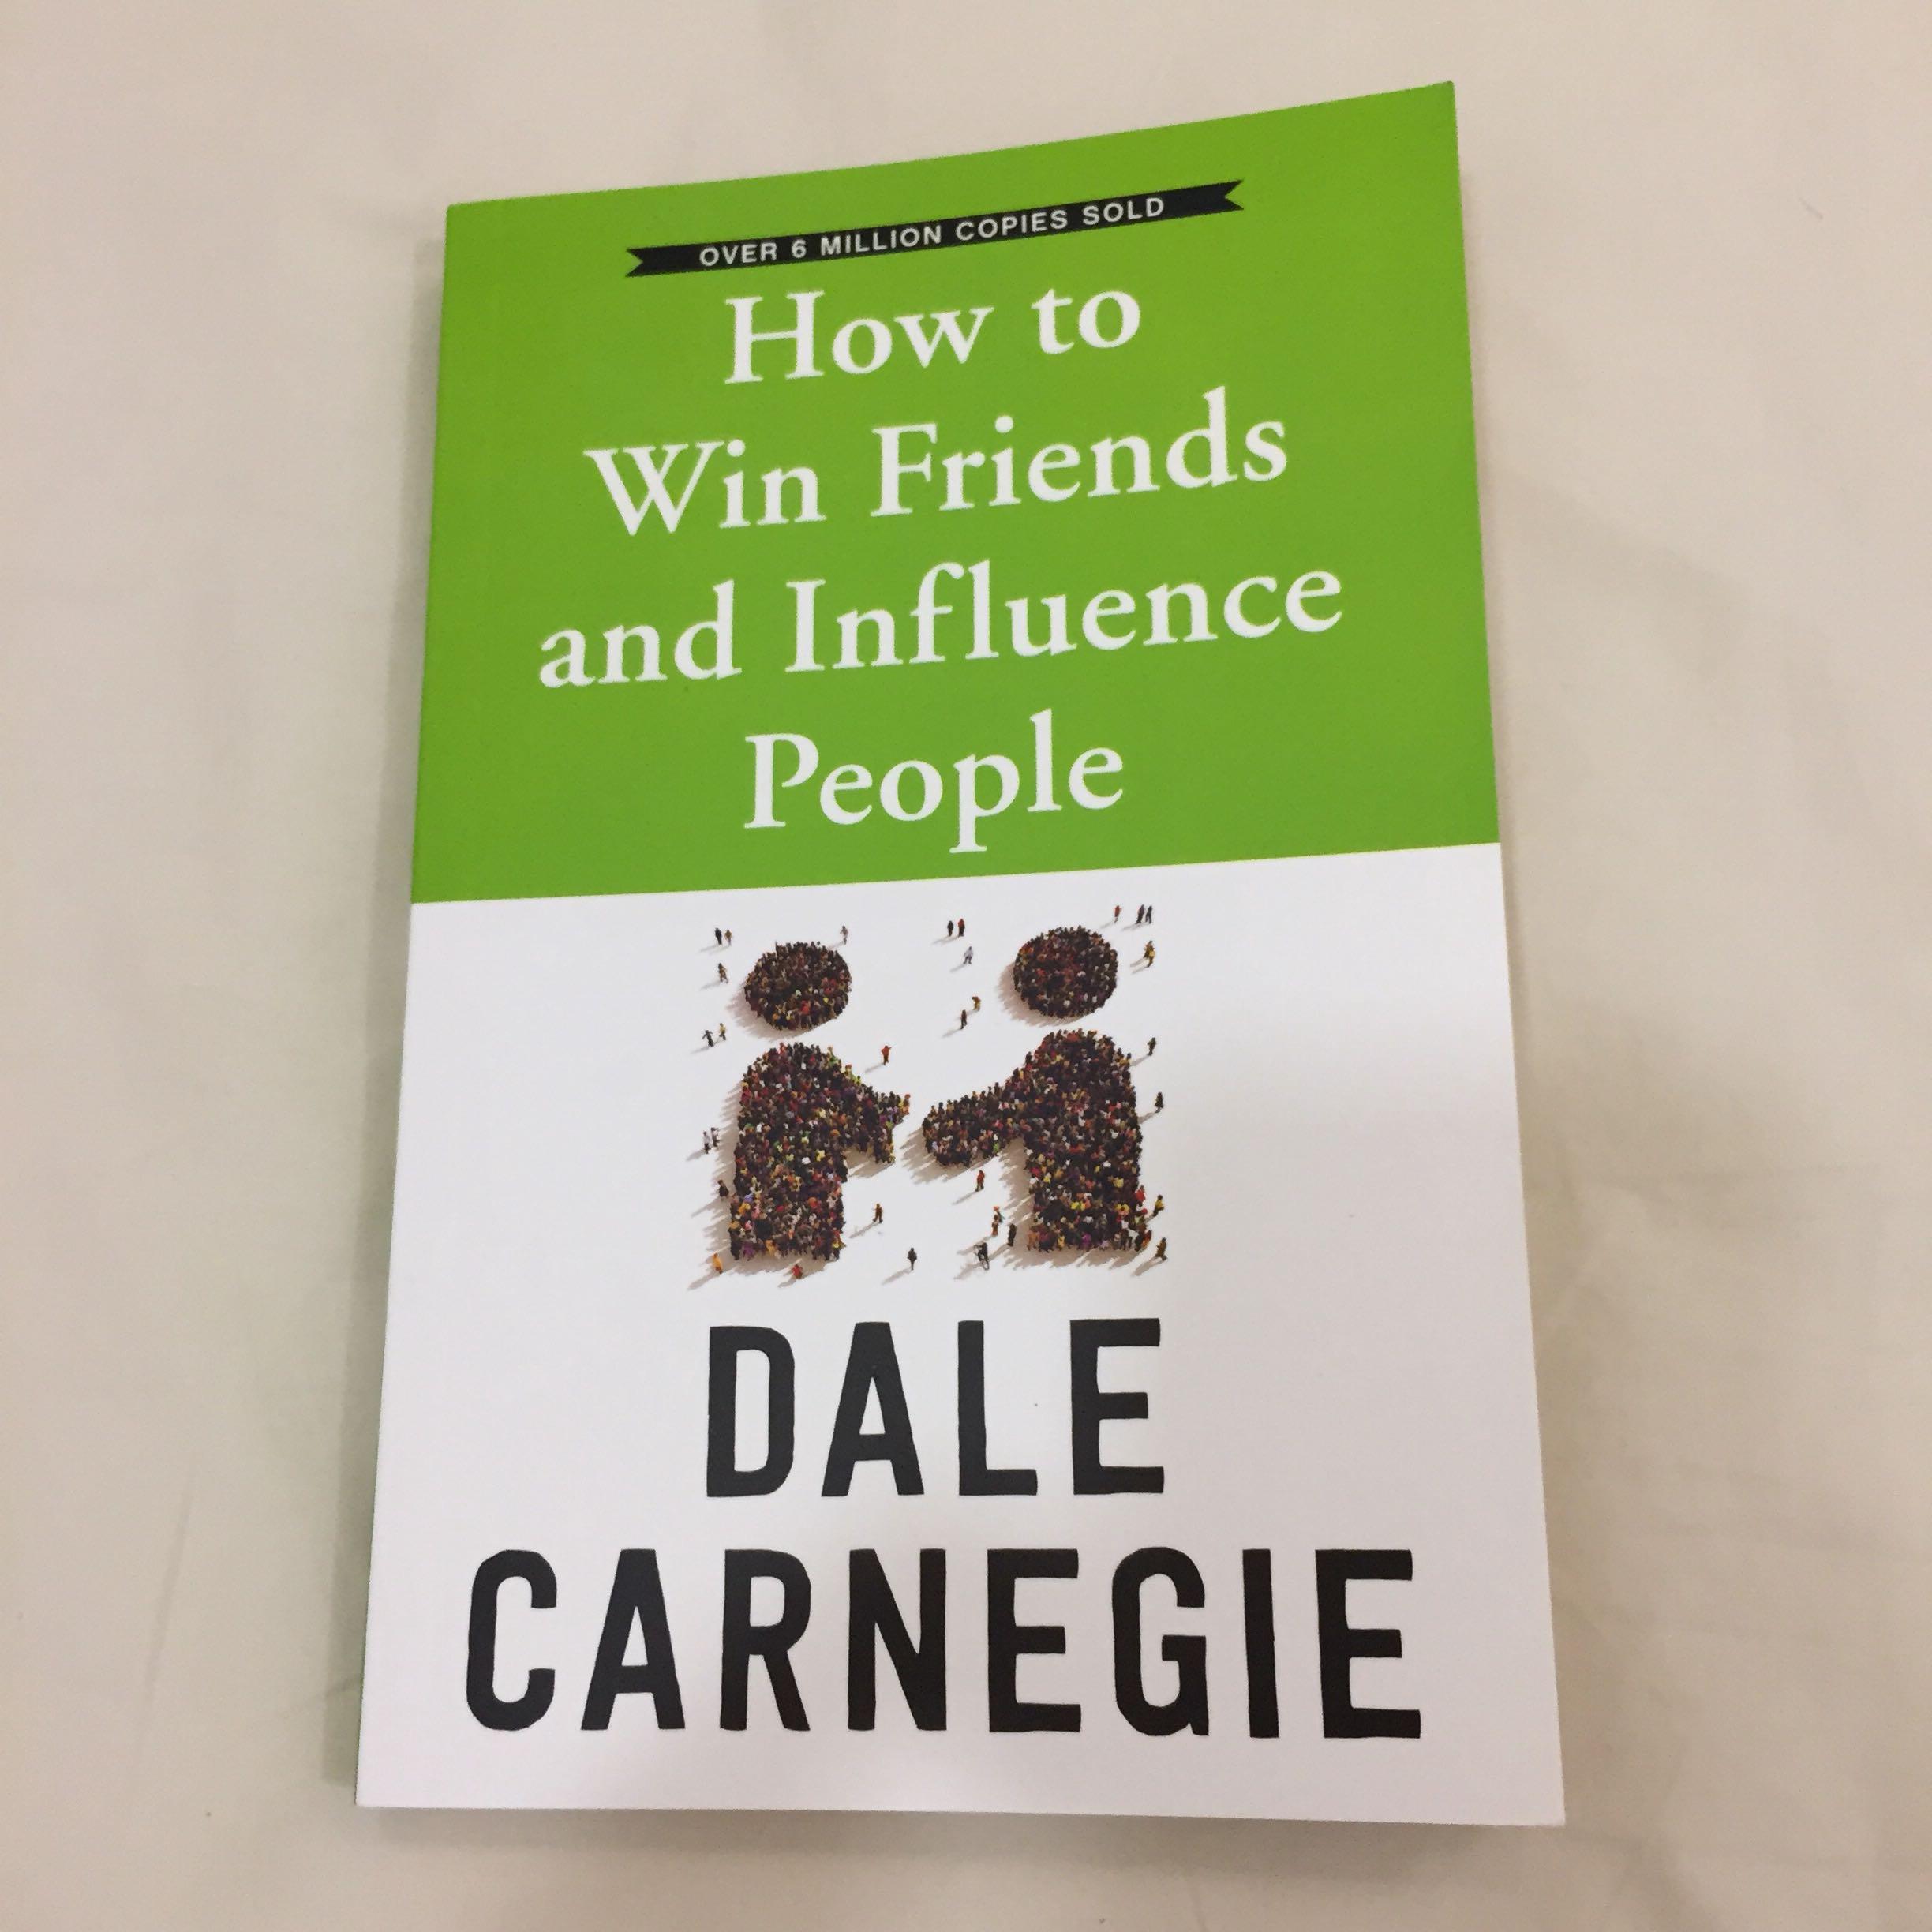 CARNEGIE,　DALE　on　INFLUENCE　PEOPLE　HOW　FRIENDS　Storybooks　TO　Magazines,　Books　Hobbies　WIN　Toys,　BY　Carousell